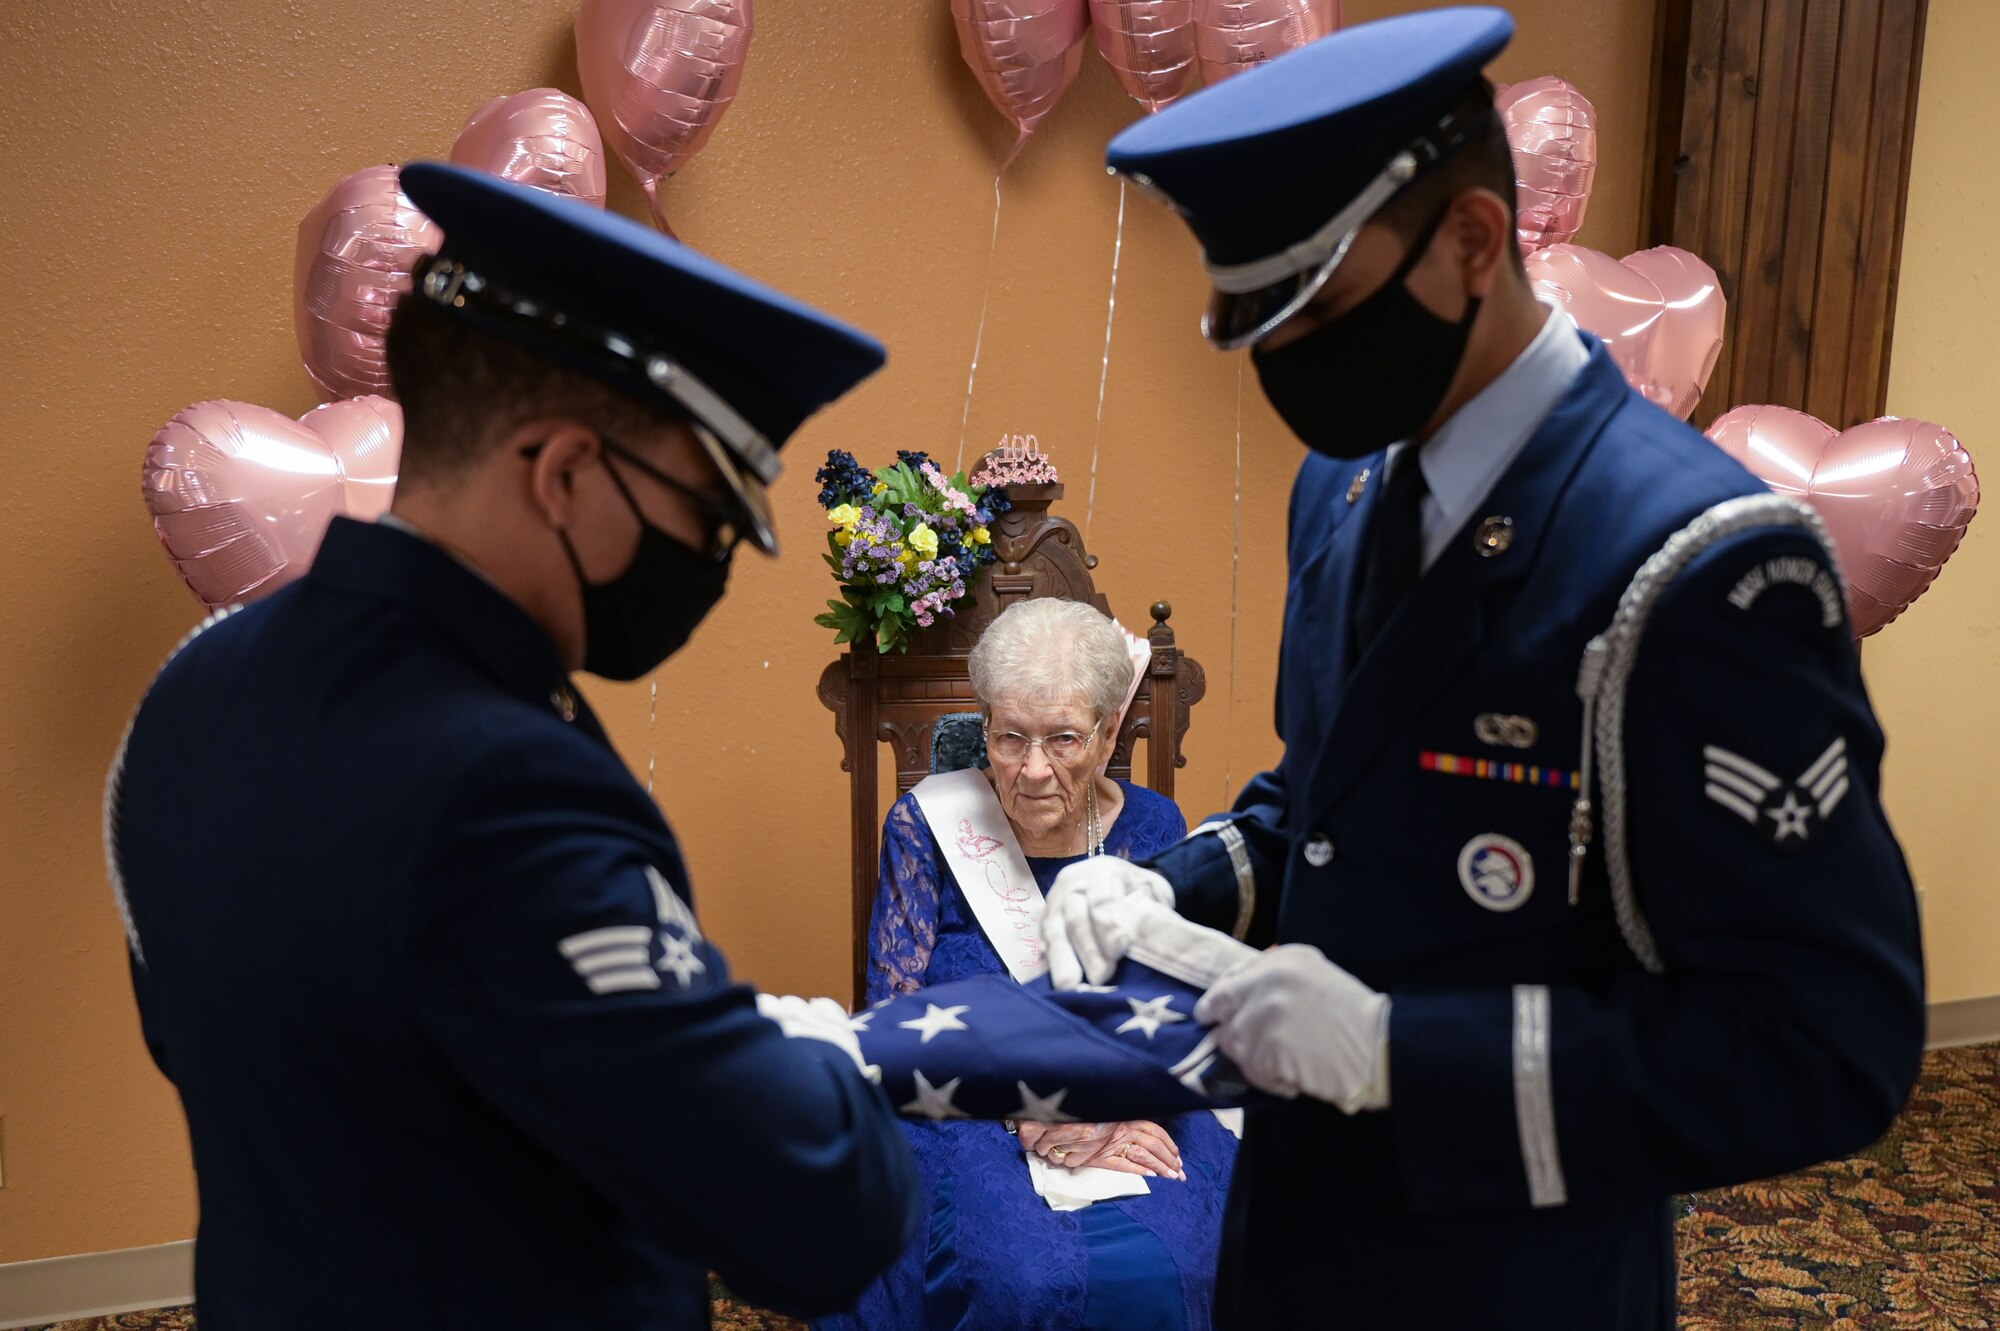 Senior Airman Gabriel Bryant, left, and Senior Airman Christian Luna, 22nd Force Support Squadron honor guardsmen, fold a flag for Fran Harris, former secretary for the Base Supply commander at Ellsworth Air Force Base, S.D., during her100th birthday celebration in Rapid City, S.D., Sept. 11, 2021.